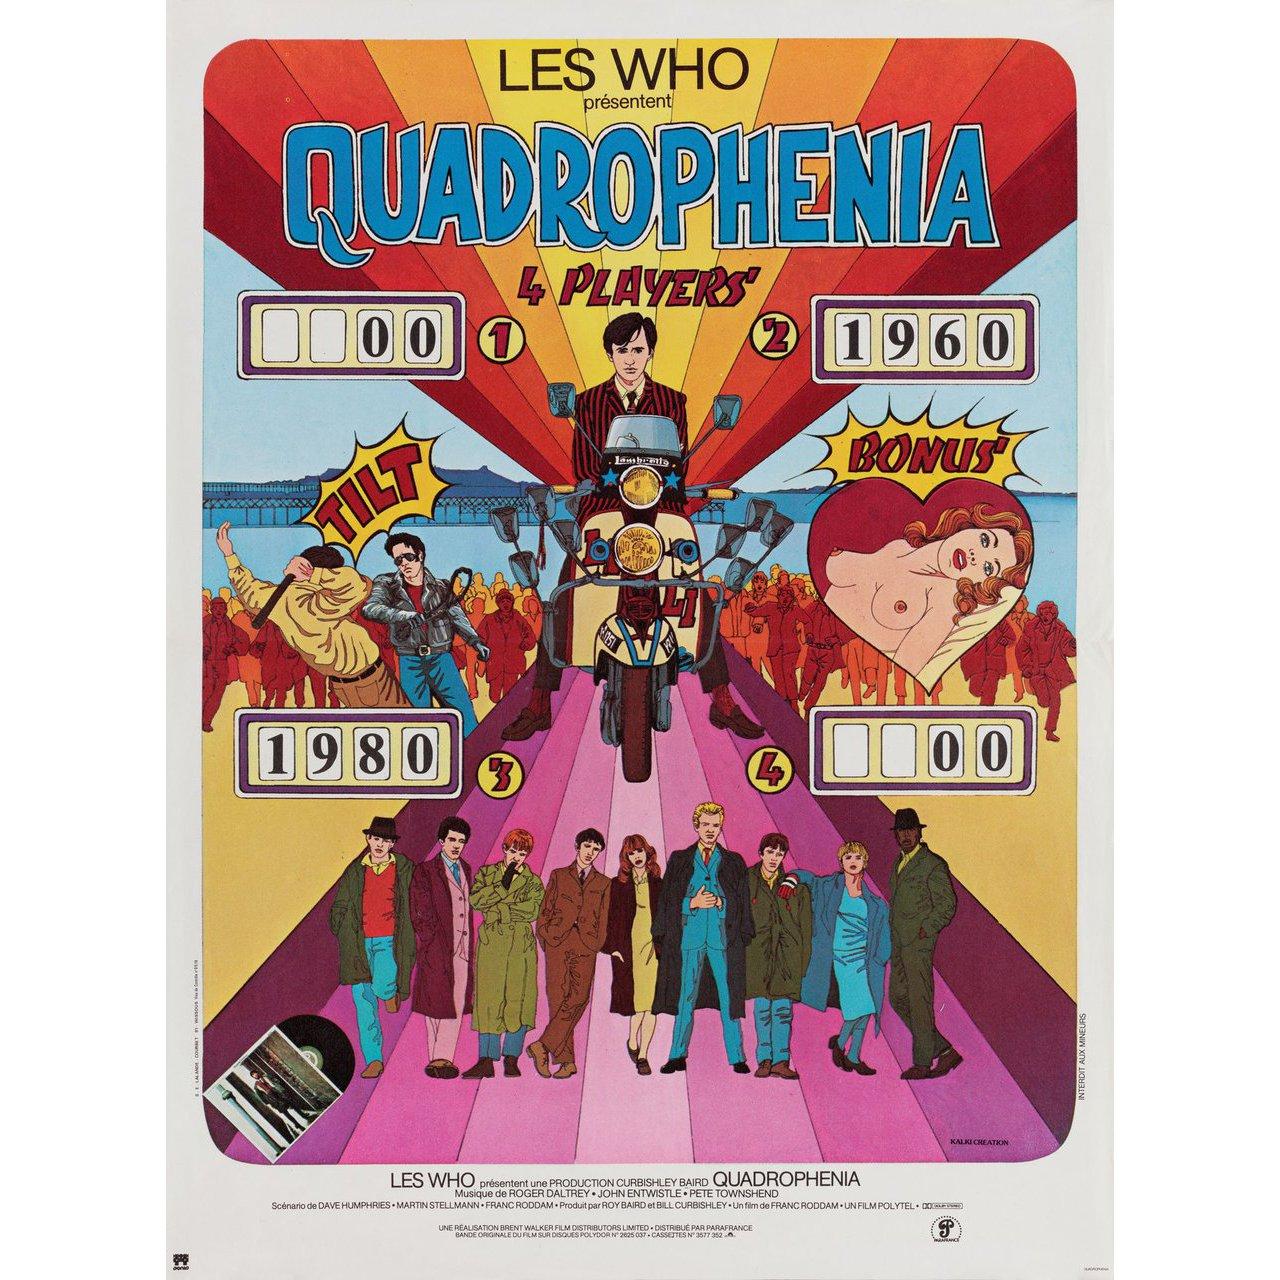 Original 1979 French petite poster by Kalki for the film Quadrophenia directed by Franc Roddam with Phil Daniels / Leslie Ash / Philip Davis / Mark Wingett. Fine condition, folded. Many original posters were issued folded or were subsequently